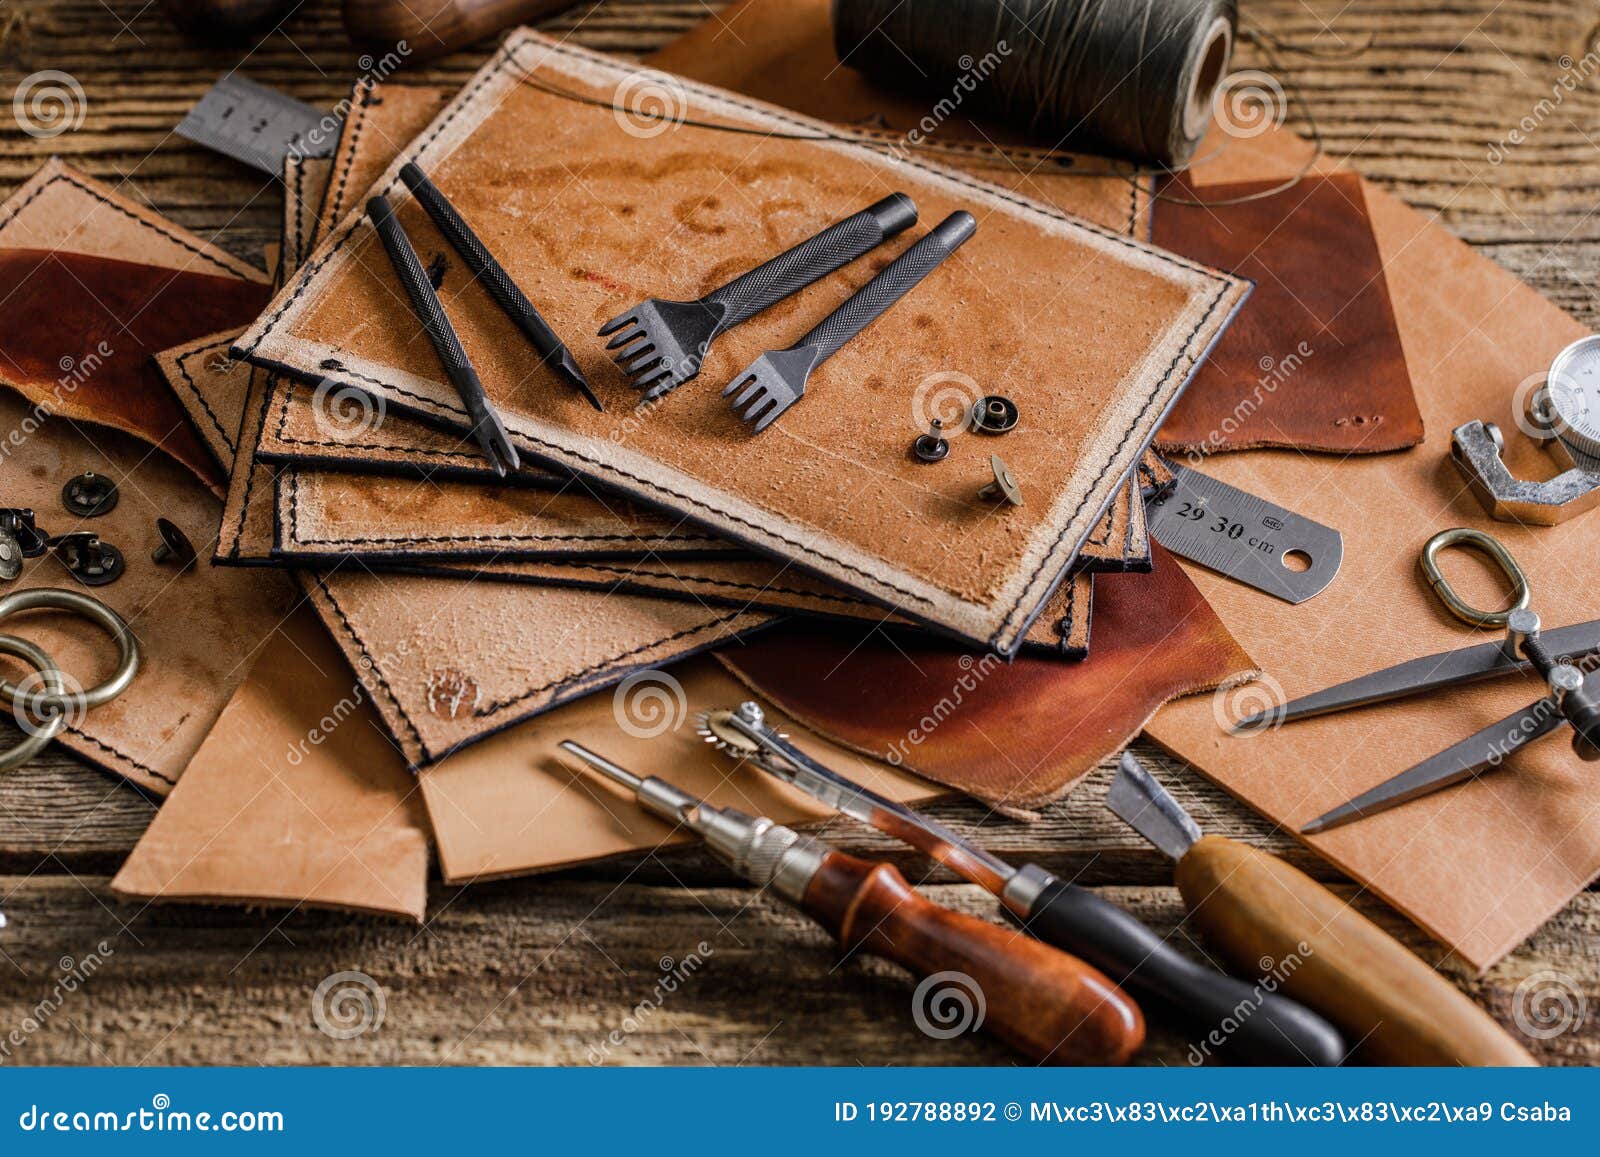 Leather crafting tools Stock Photo by ©haveseen 100551164